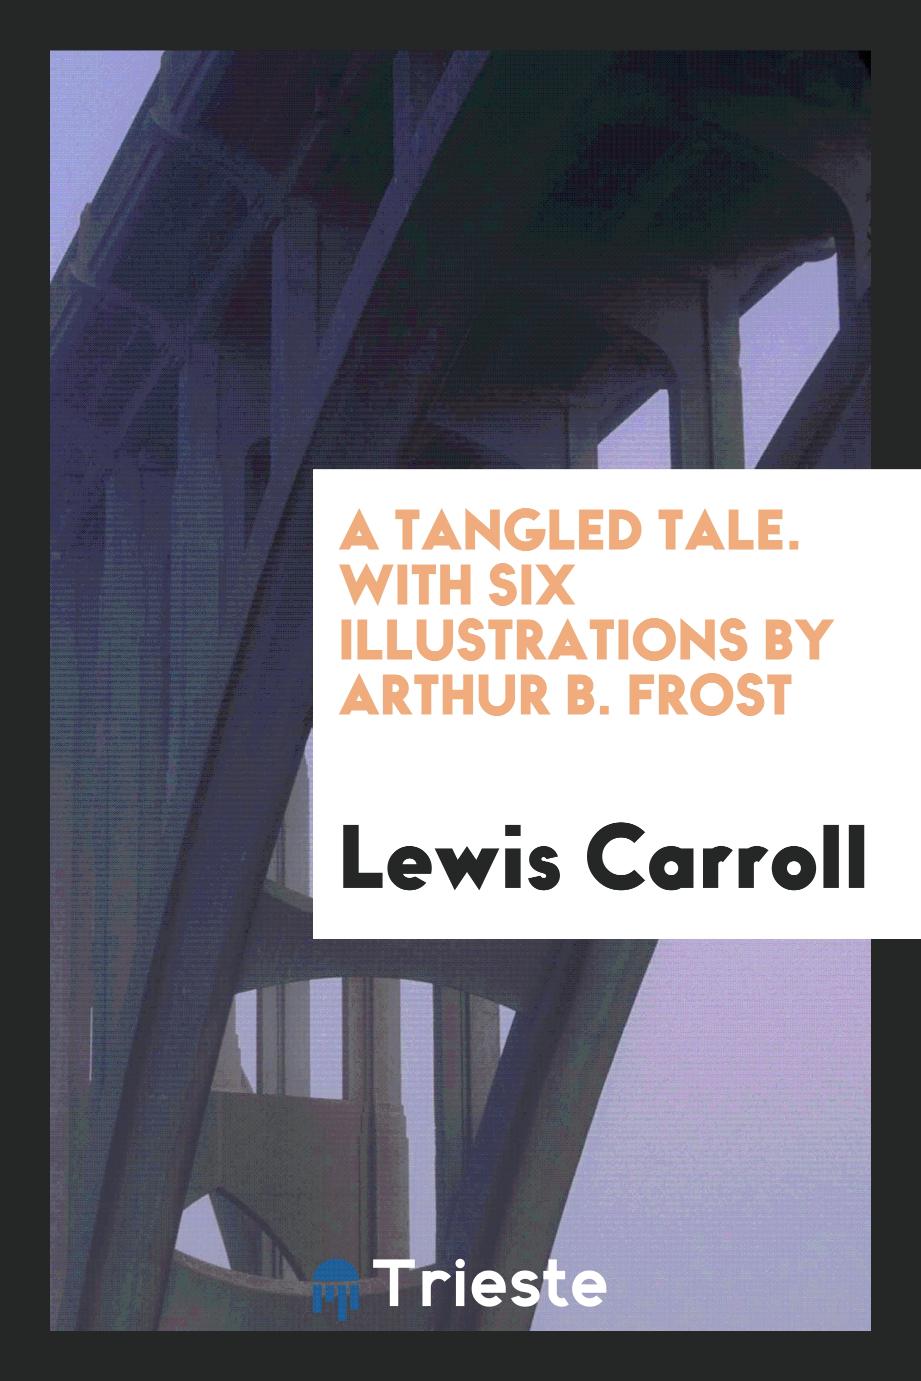 A Tangled Tale. With Six Illustrations by Arthur B. Frost